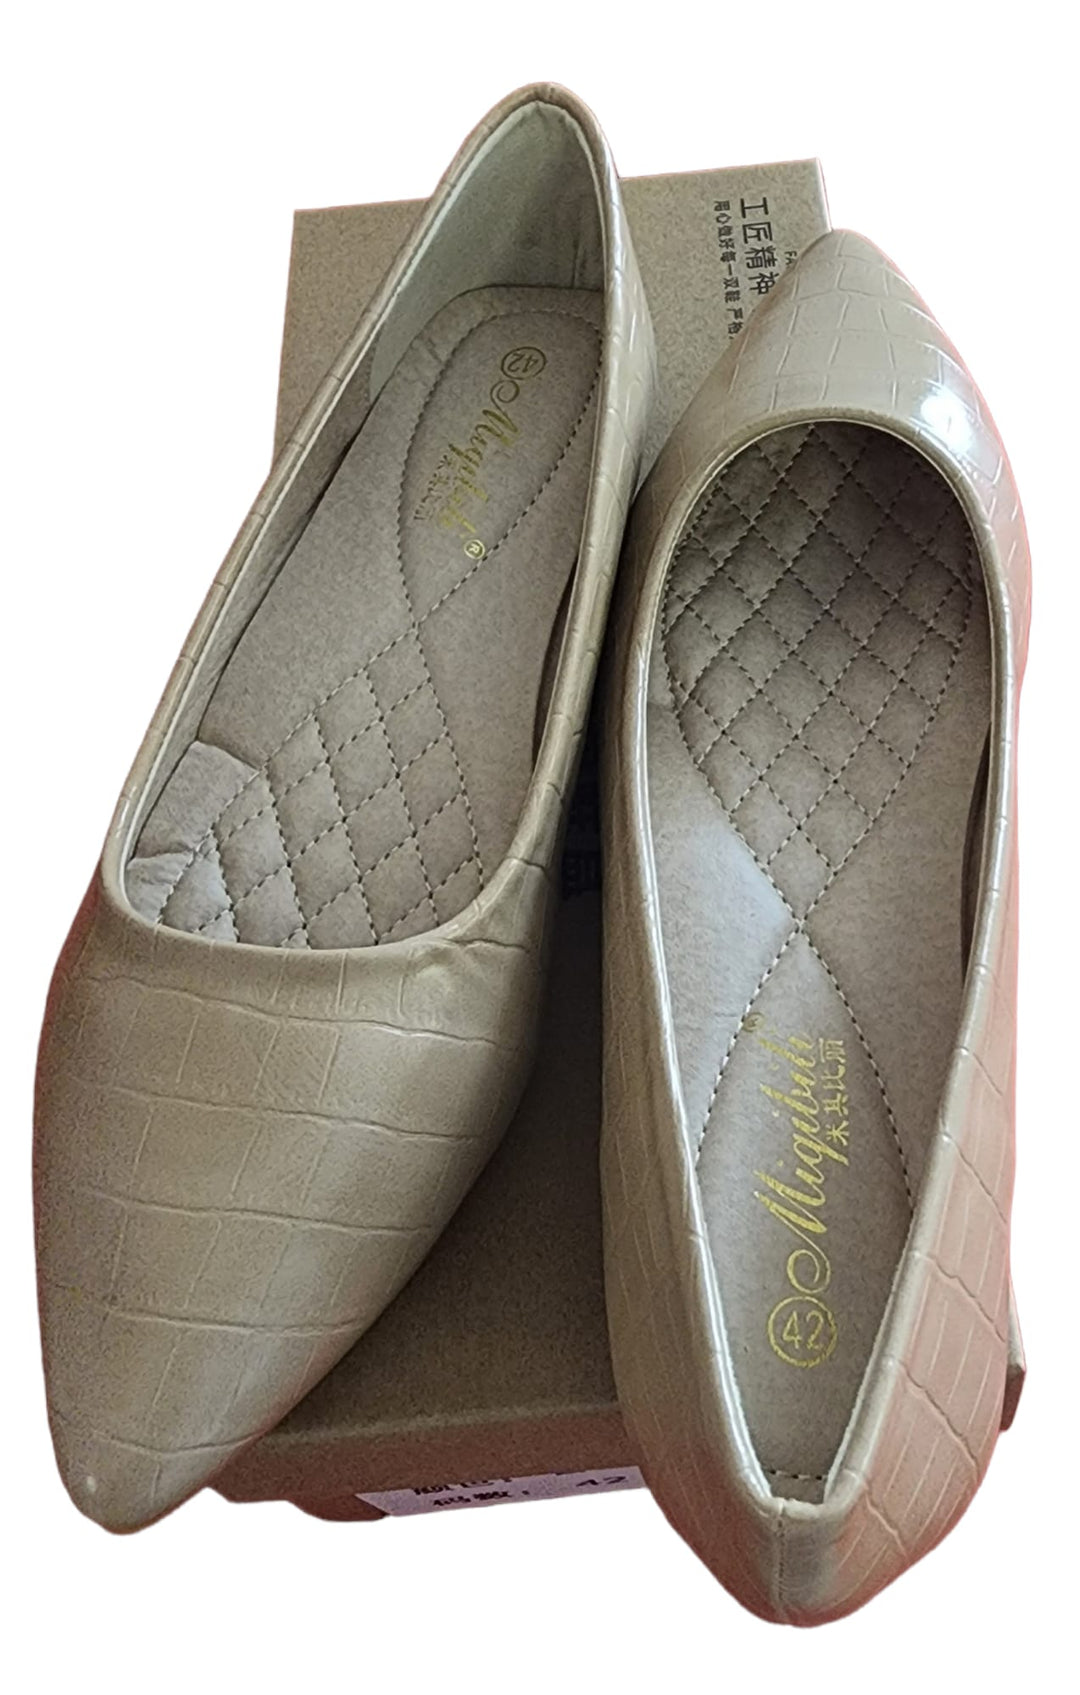 Ladies plain flat shoes for every day.